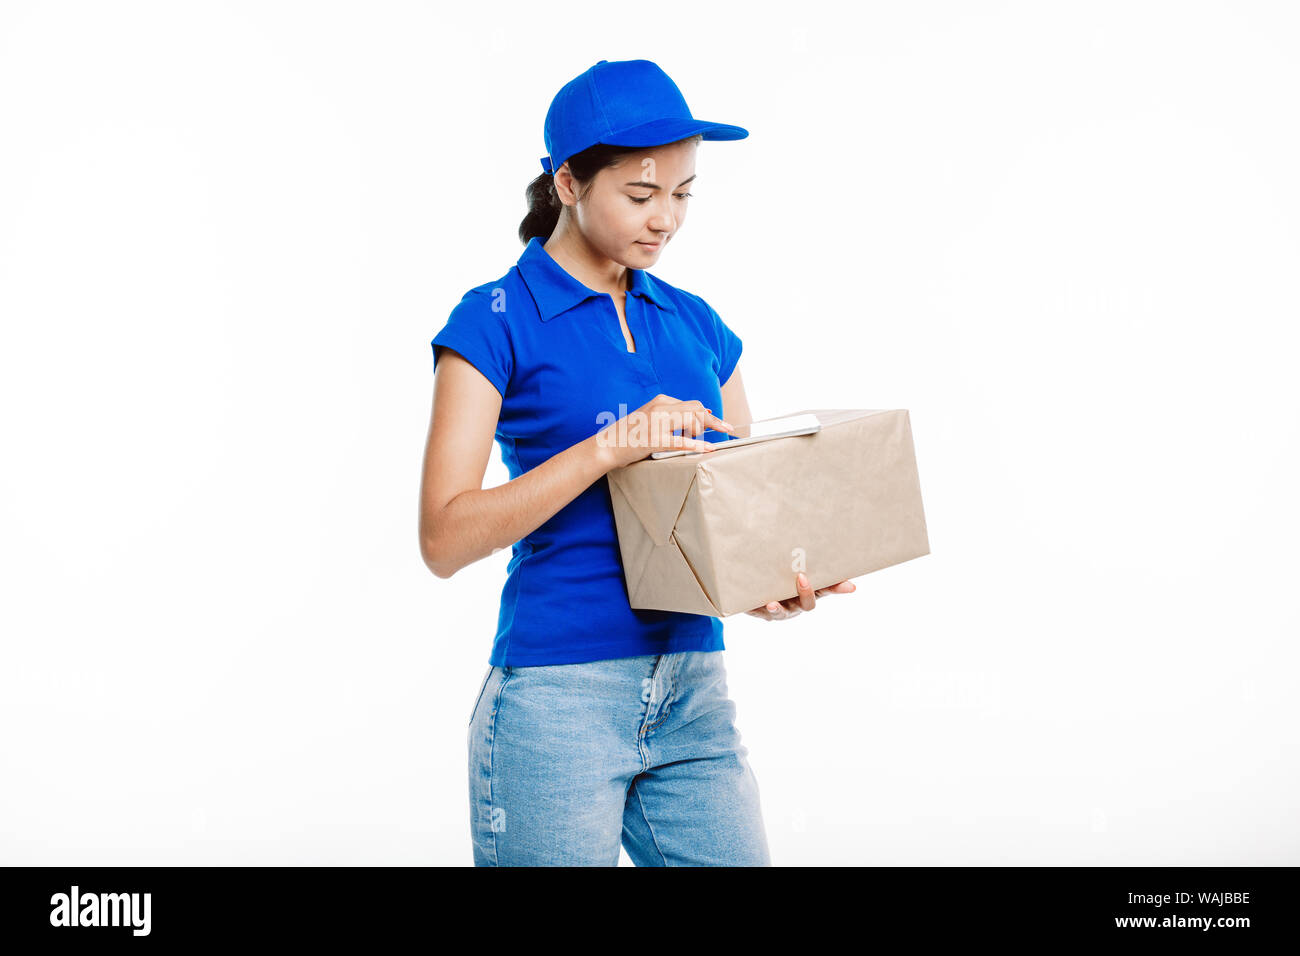 Girl in the post office uniform goes through the feed on her tablet as she holds the big parcel. Stock Photo